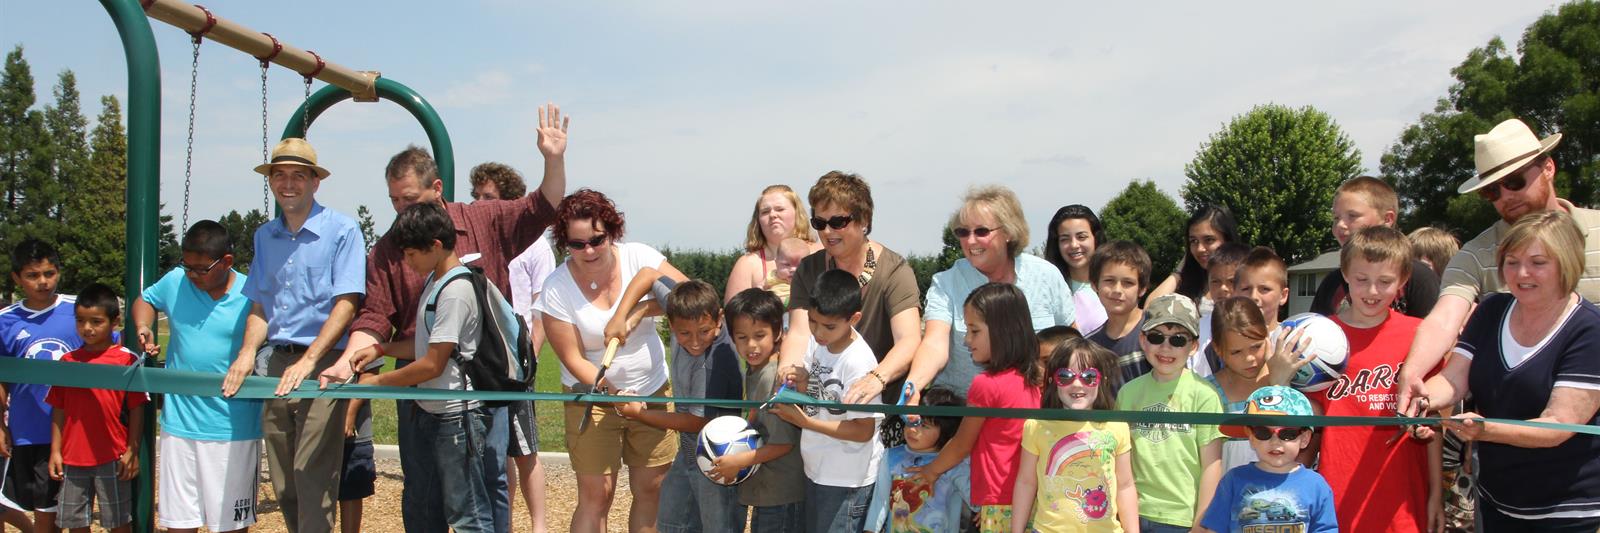 Residents and volunteers cutting the ribbon on new playground equipment at Bill Riegel Park